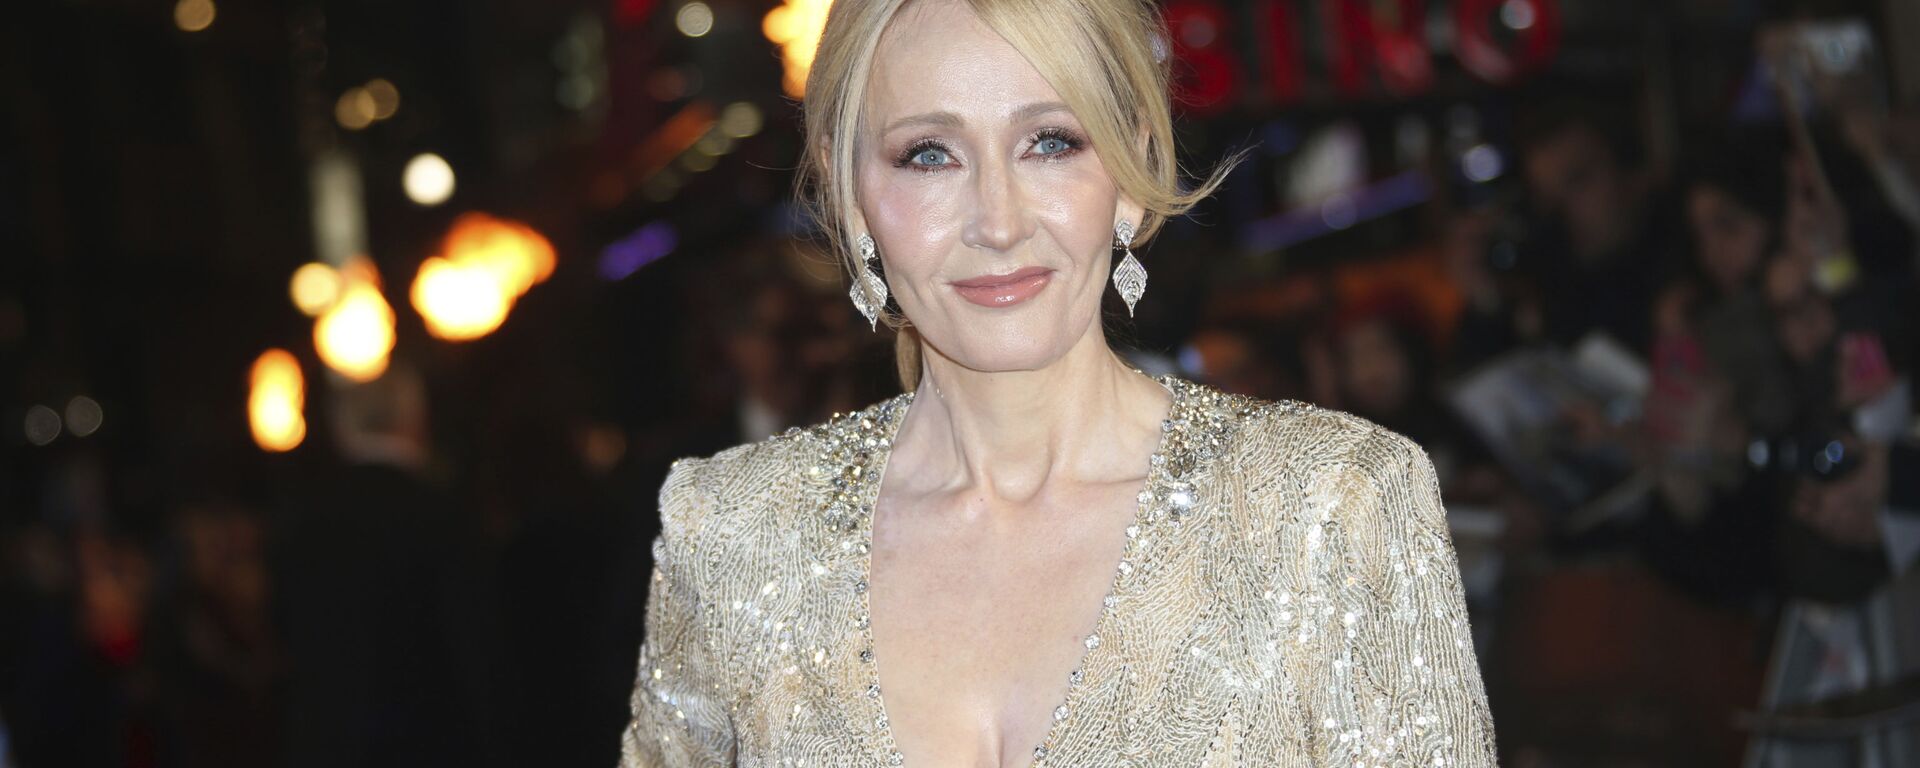 Author J.K. Rowling poses for photographers upon arrival at the premiere of the film 'Fantastic Beasts And Where To Find Them' in London, Tuesday, Nov. 15, 2016.  - Sputnik International, 1920, 11.06.2020